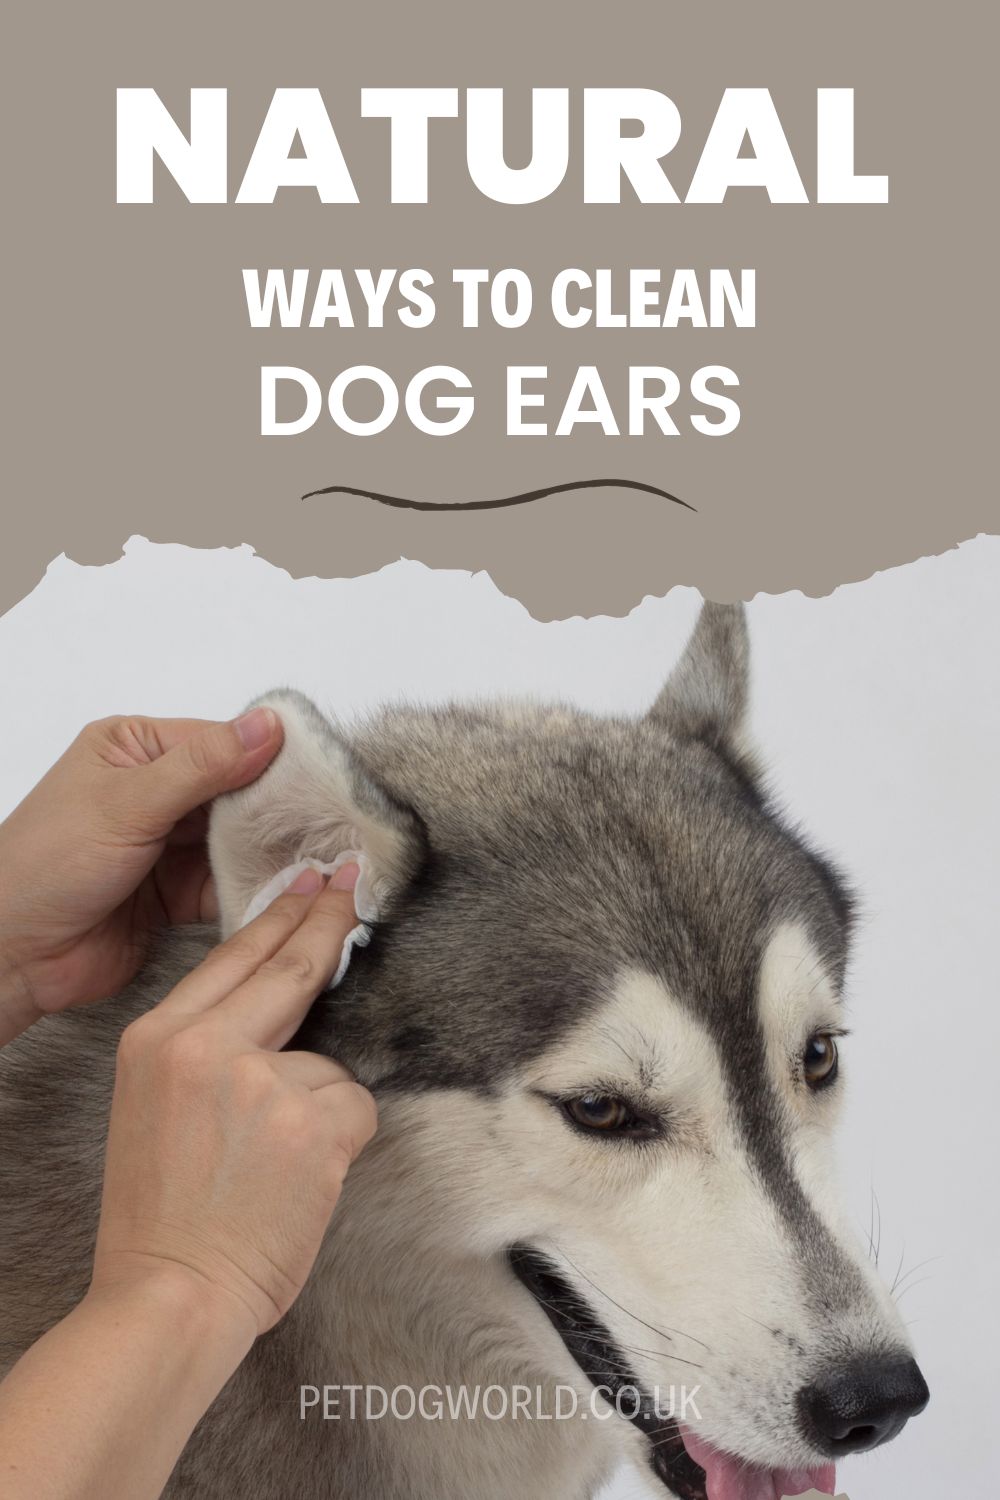 Essential tips for maintaining your dog's ear health naturally, ensuring comfort, and preventing infections.